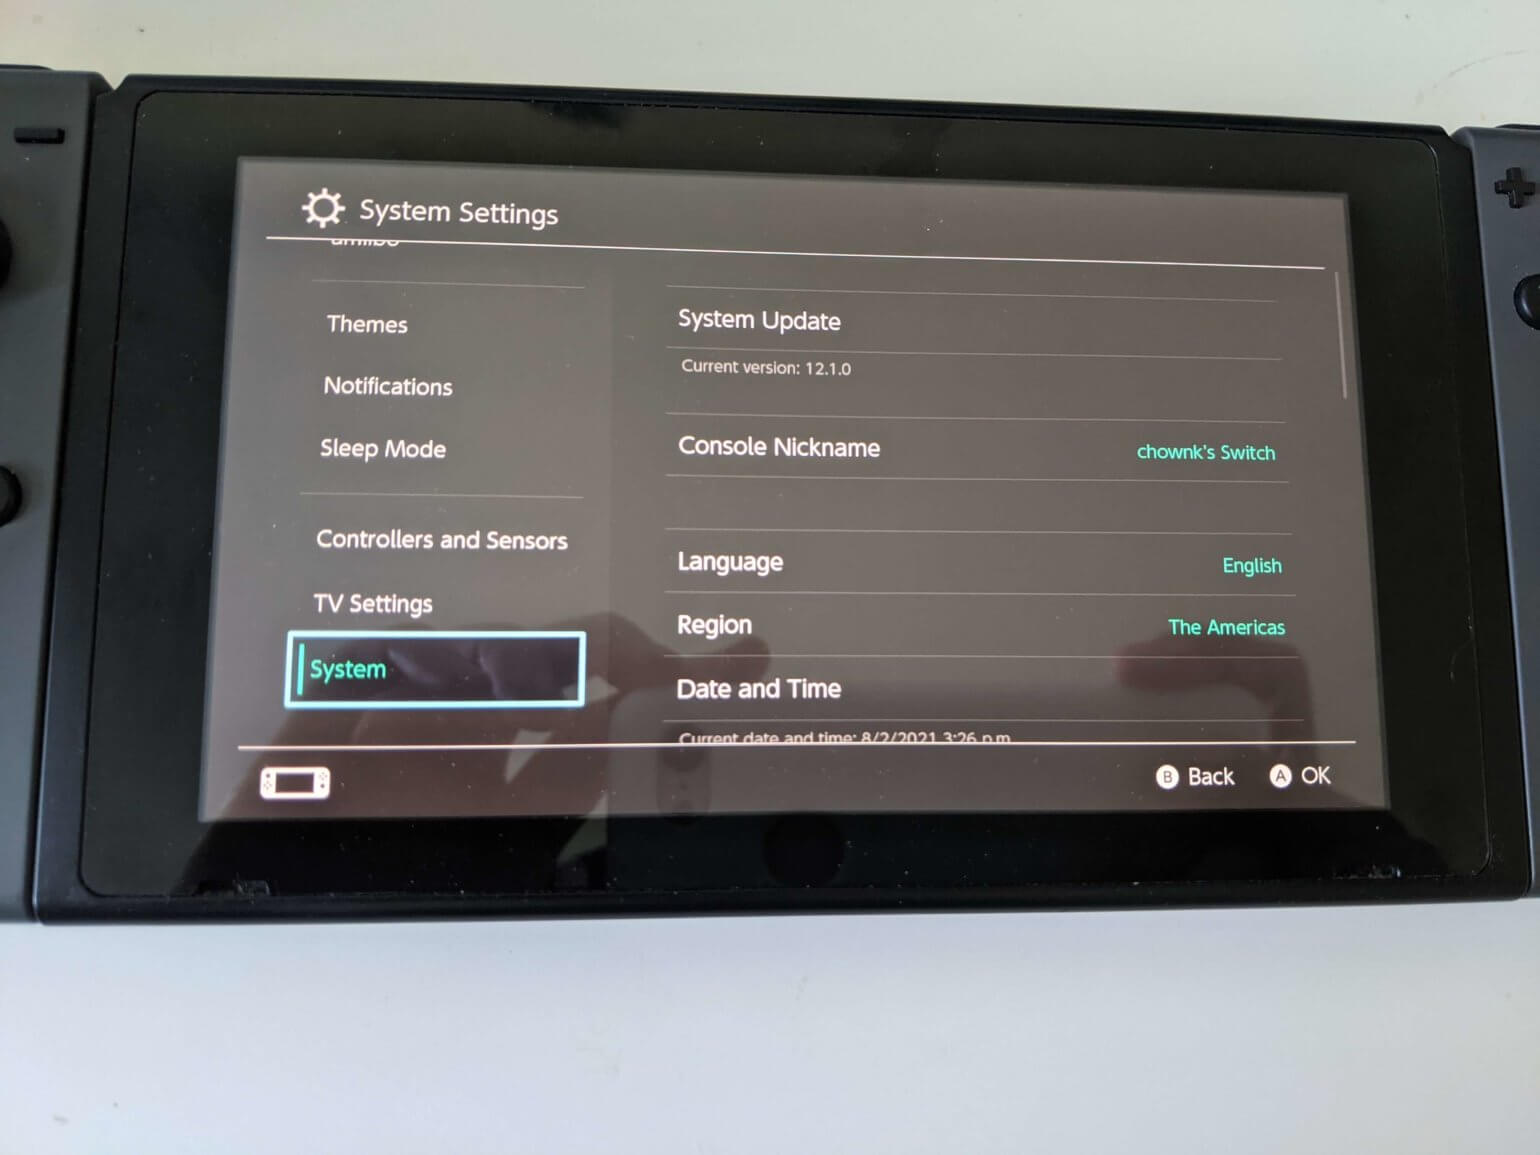 How To Change The Language On The Nintendo Switch Console - Switcher.gg